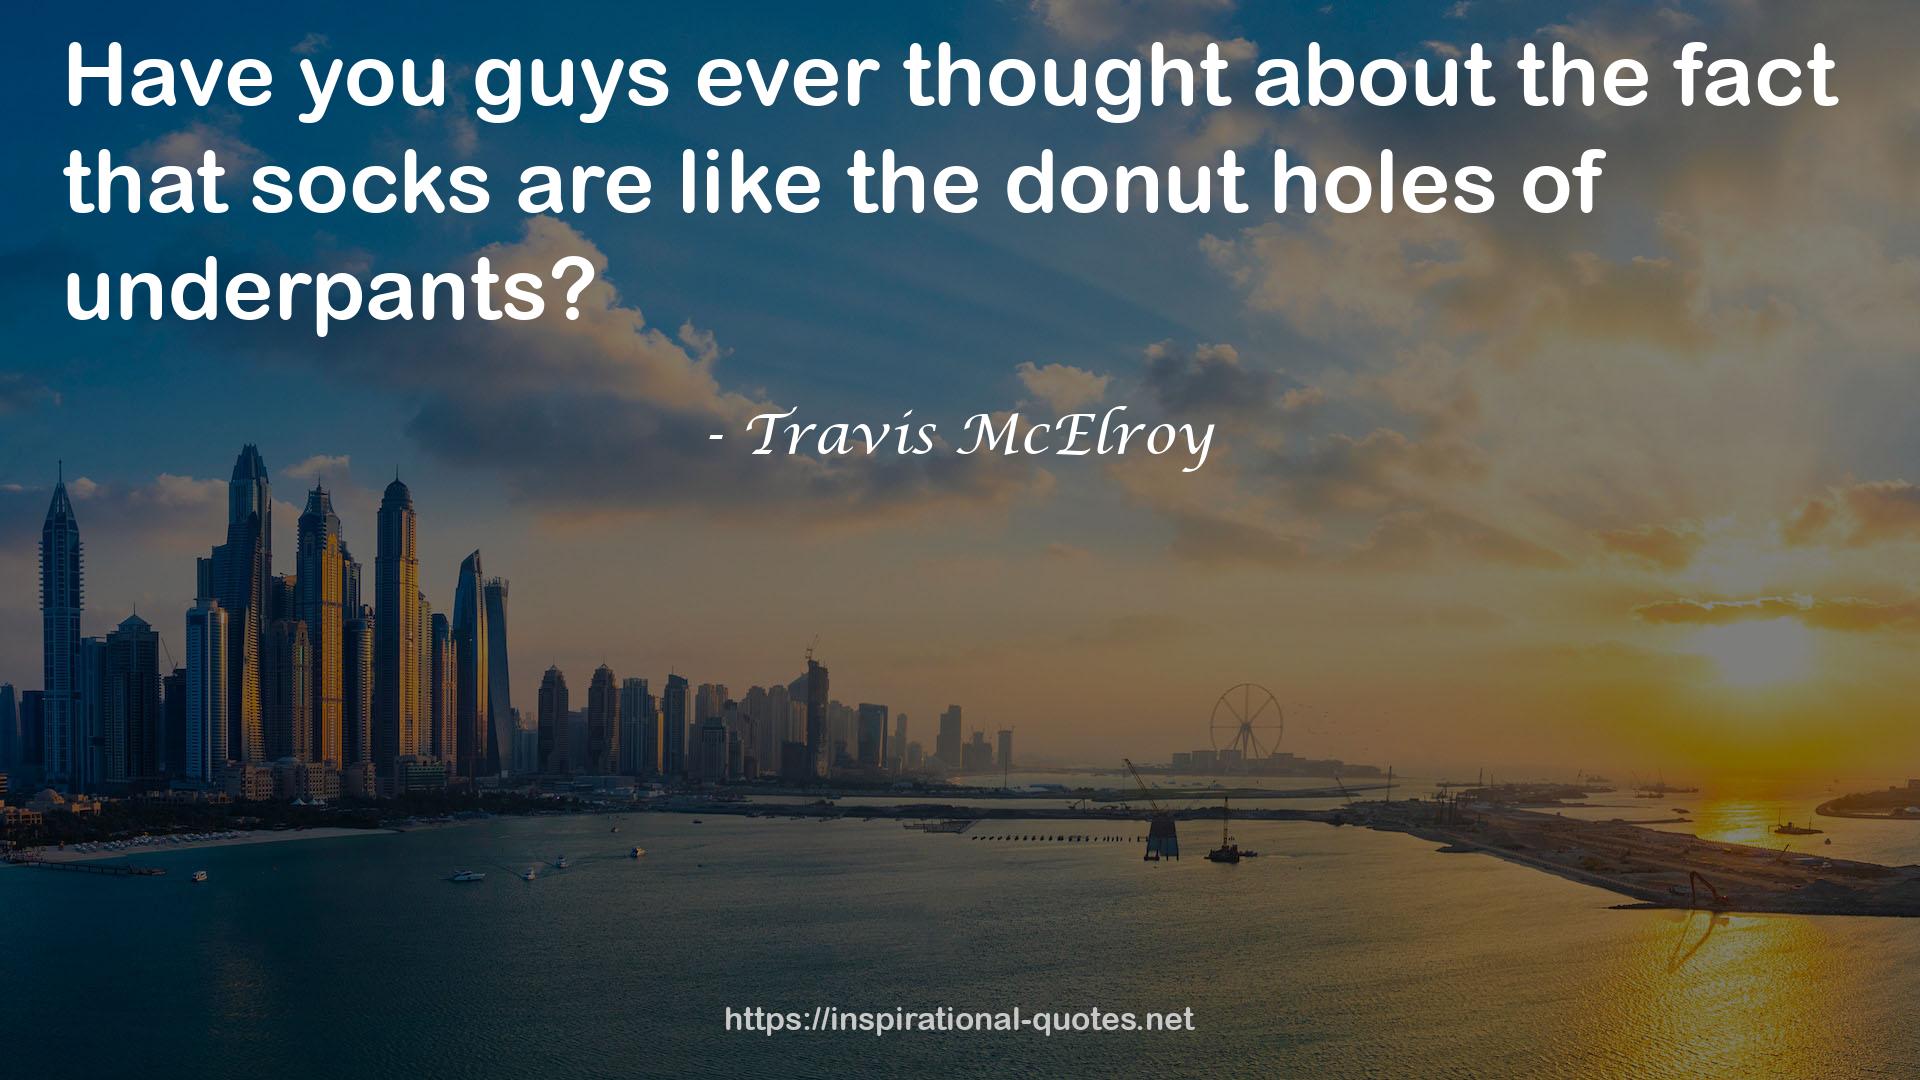 Travis McElroy QUOTES